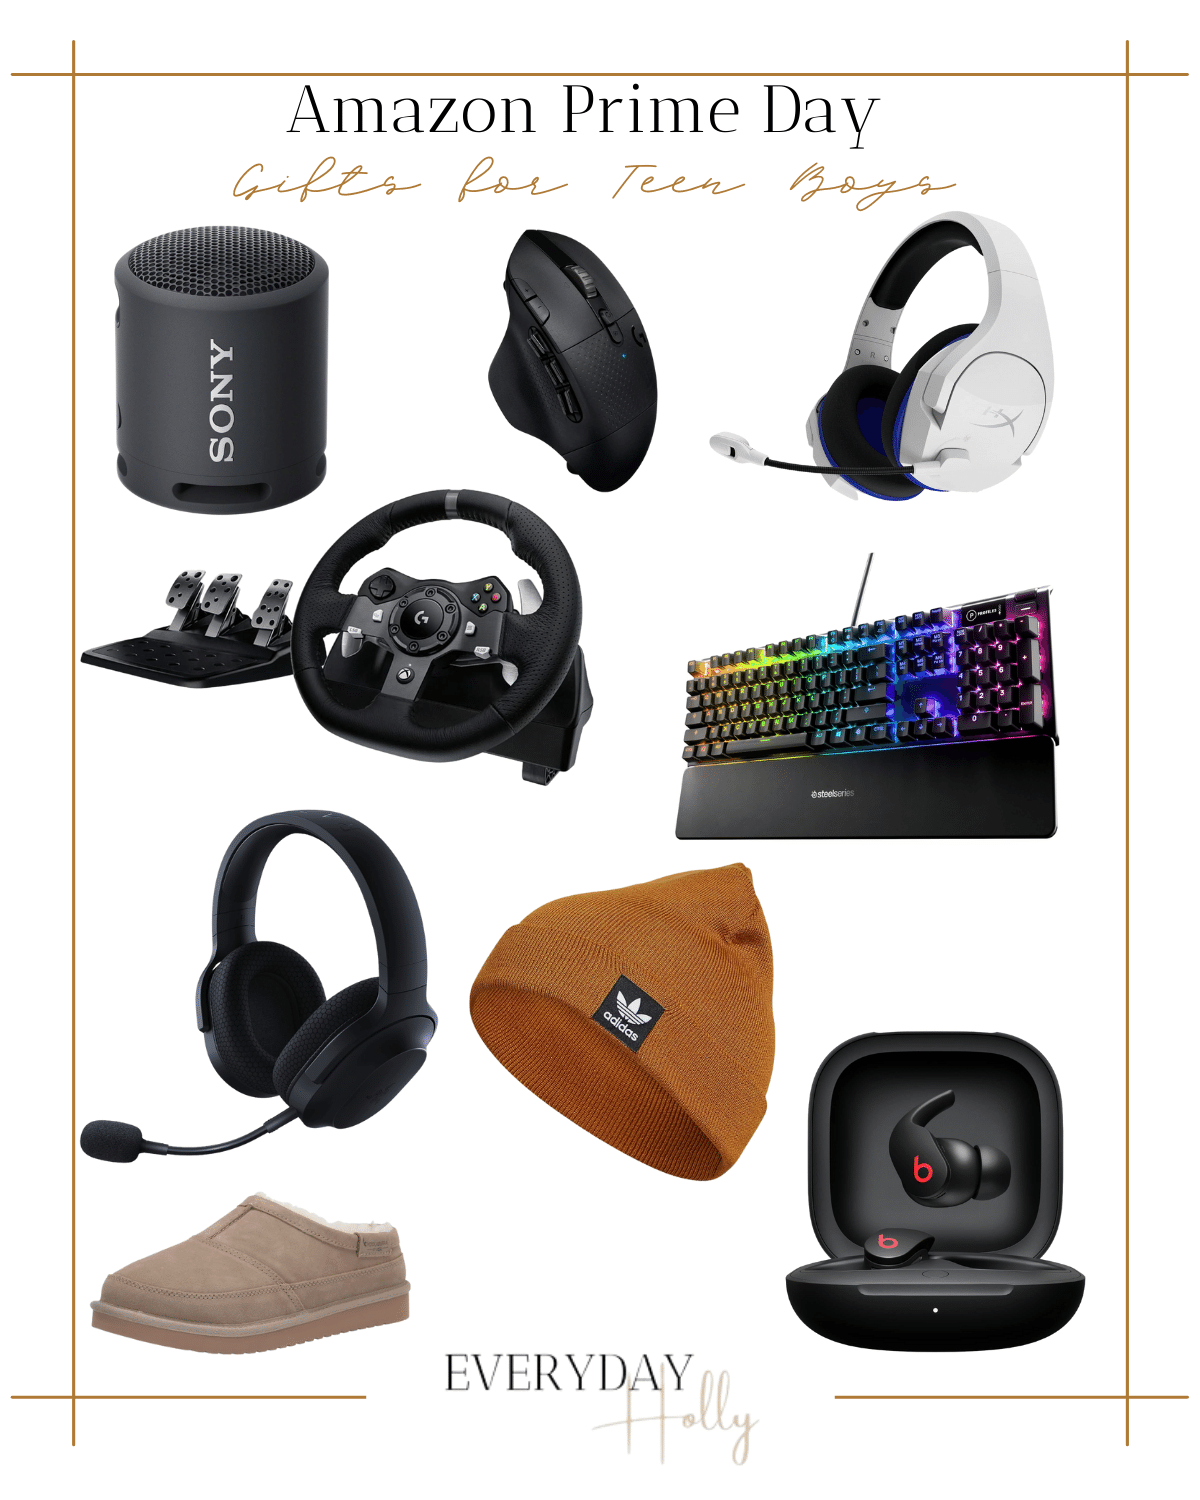 amazon gifts for teen boys, sony speaker, gaming mouse, video game wireless gaming headset, driving wheel & push pedals, gaming keyboard, gaming headset, adidas beanie, ugg slippers, beats headphones 